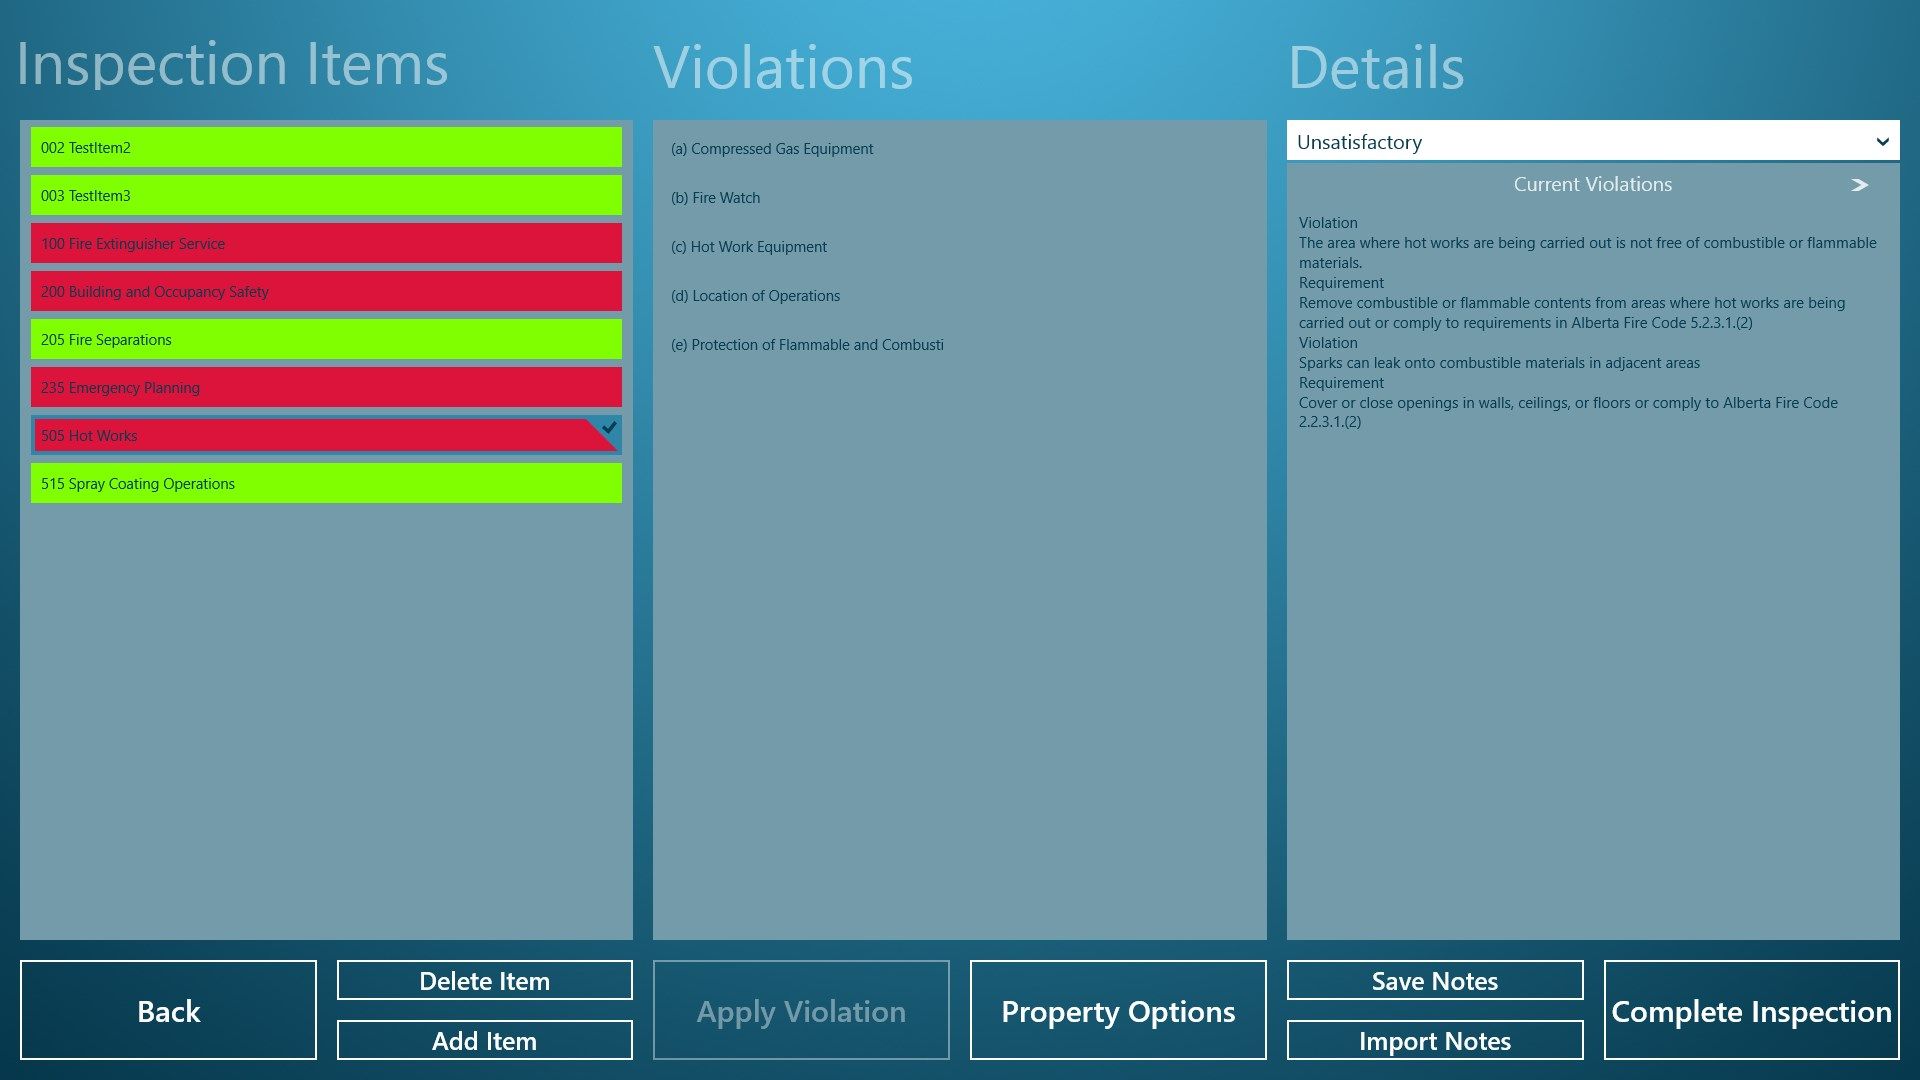 You can change the status of inspection items, add violations, add additional text, and import notes